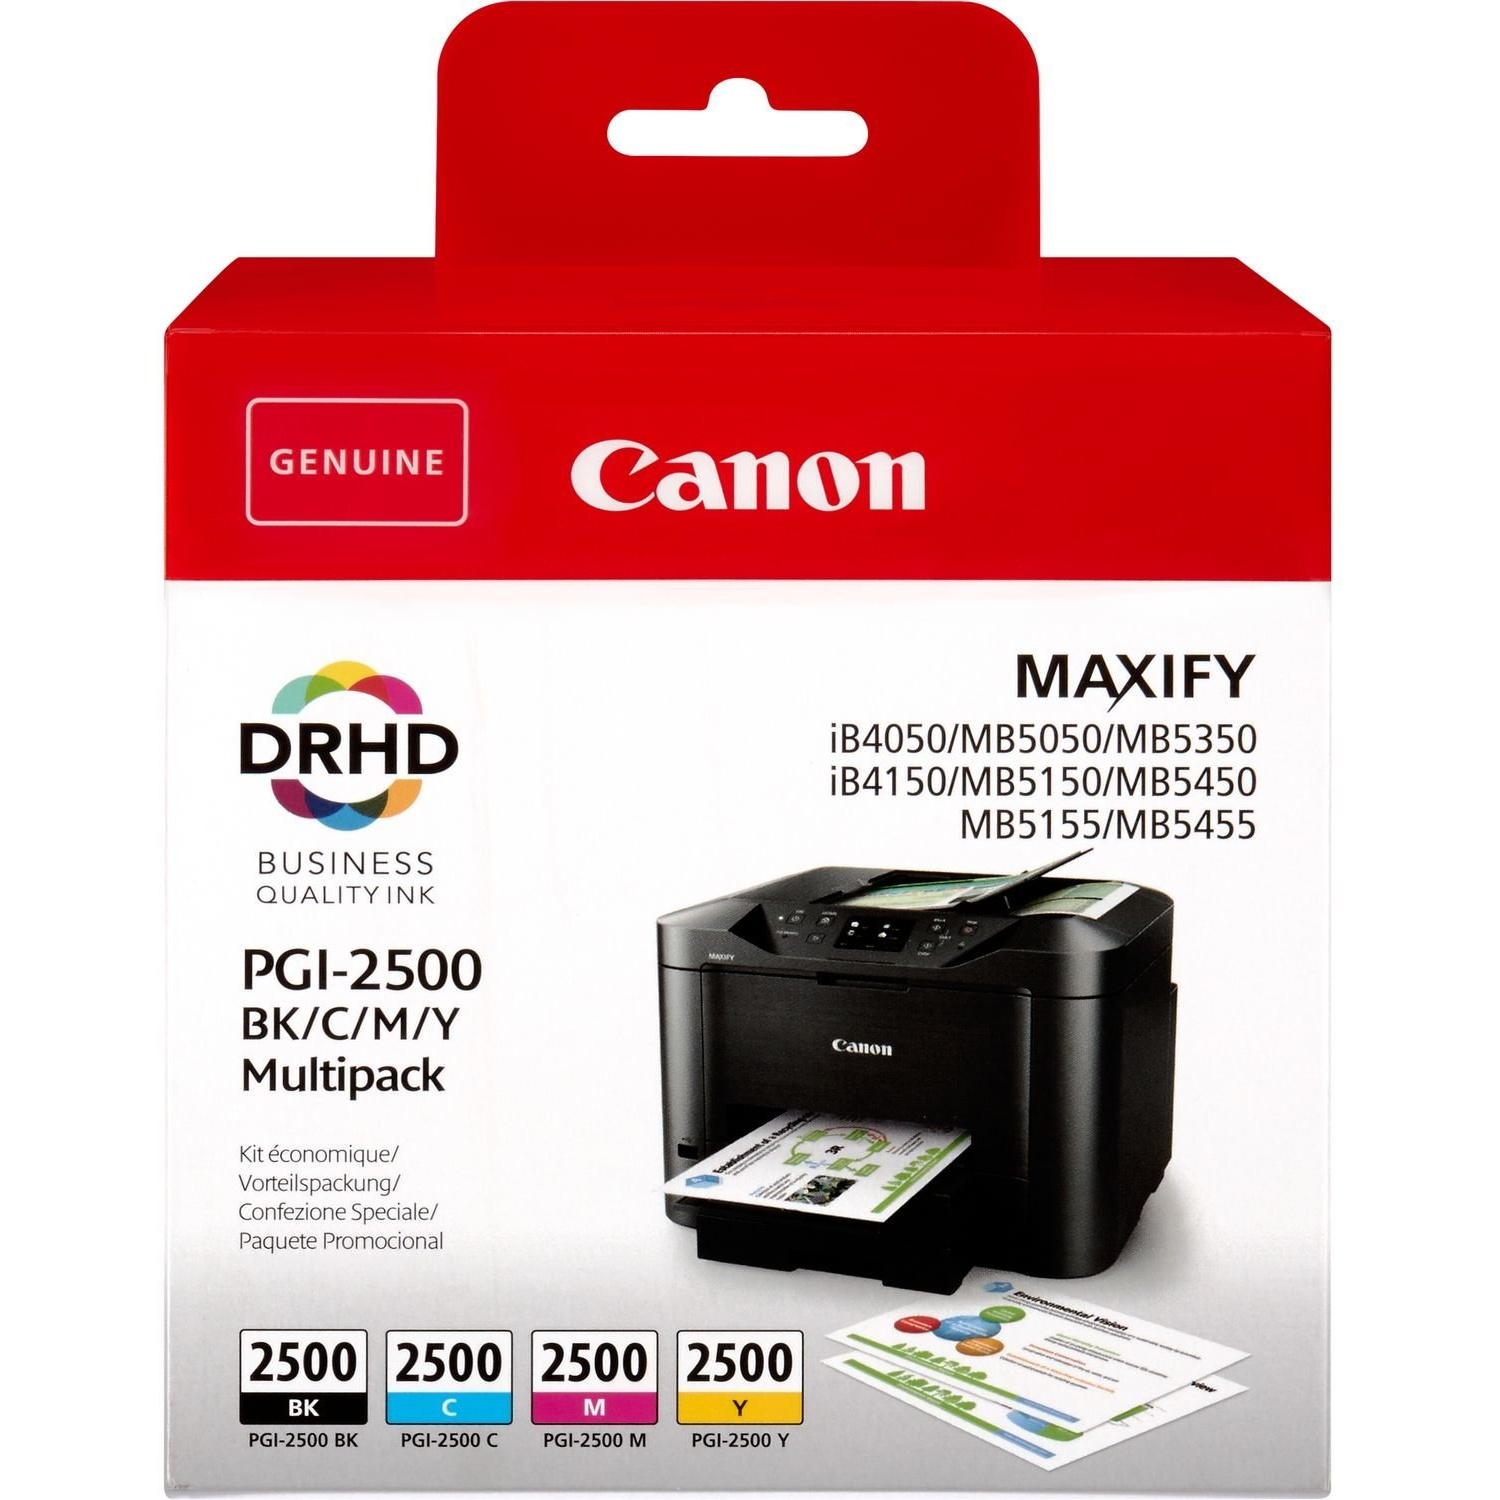 canon mb5450